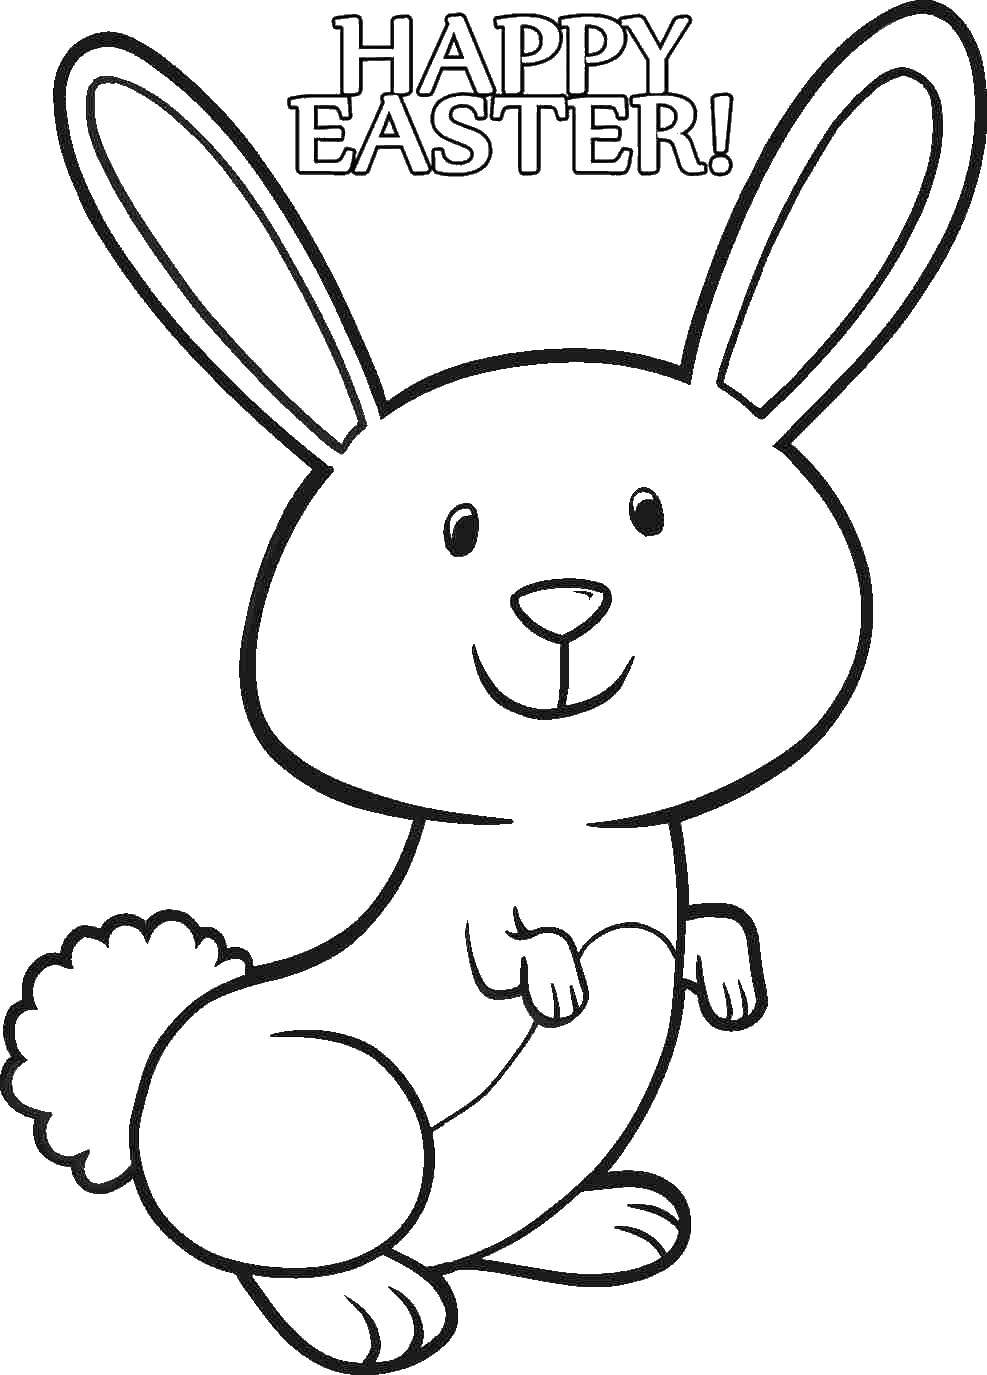 Coloring Rabbit. Category the rabbit. Tags:  the rabbit.